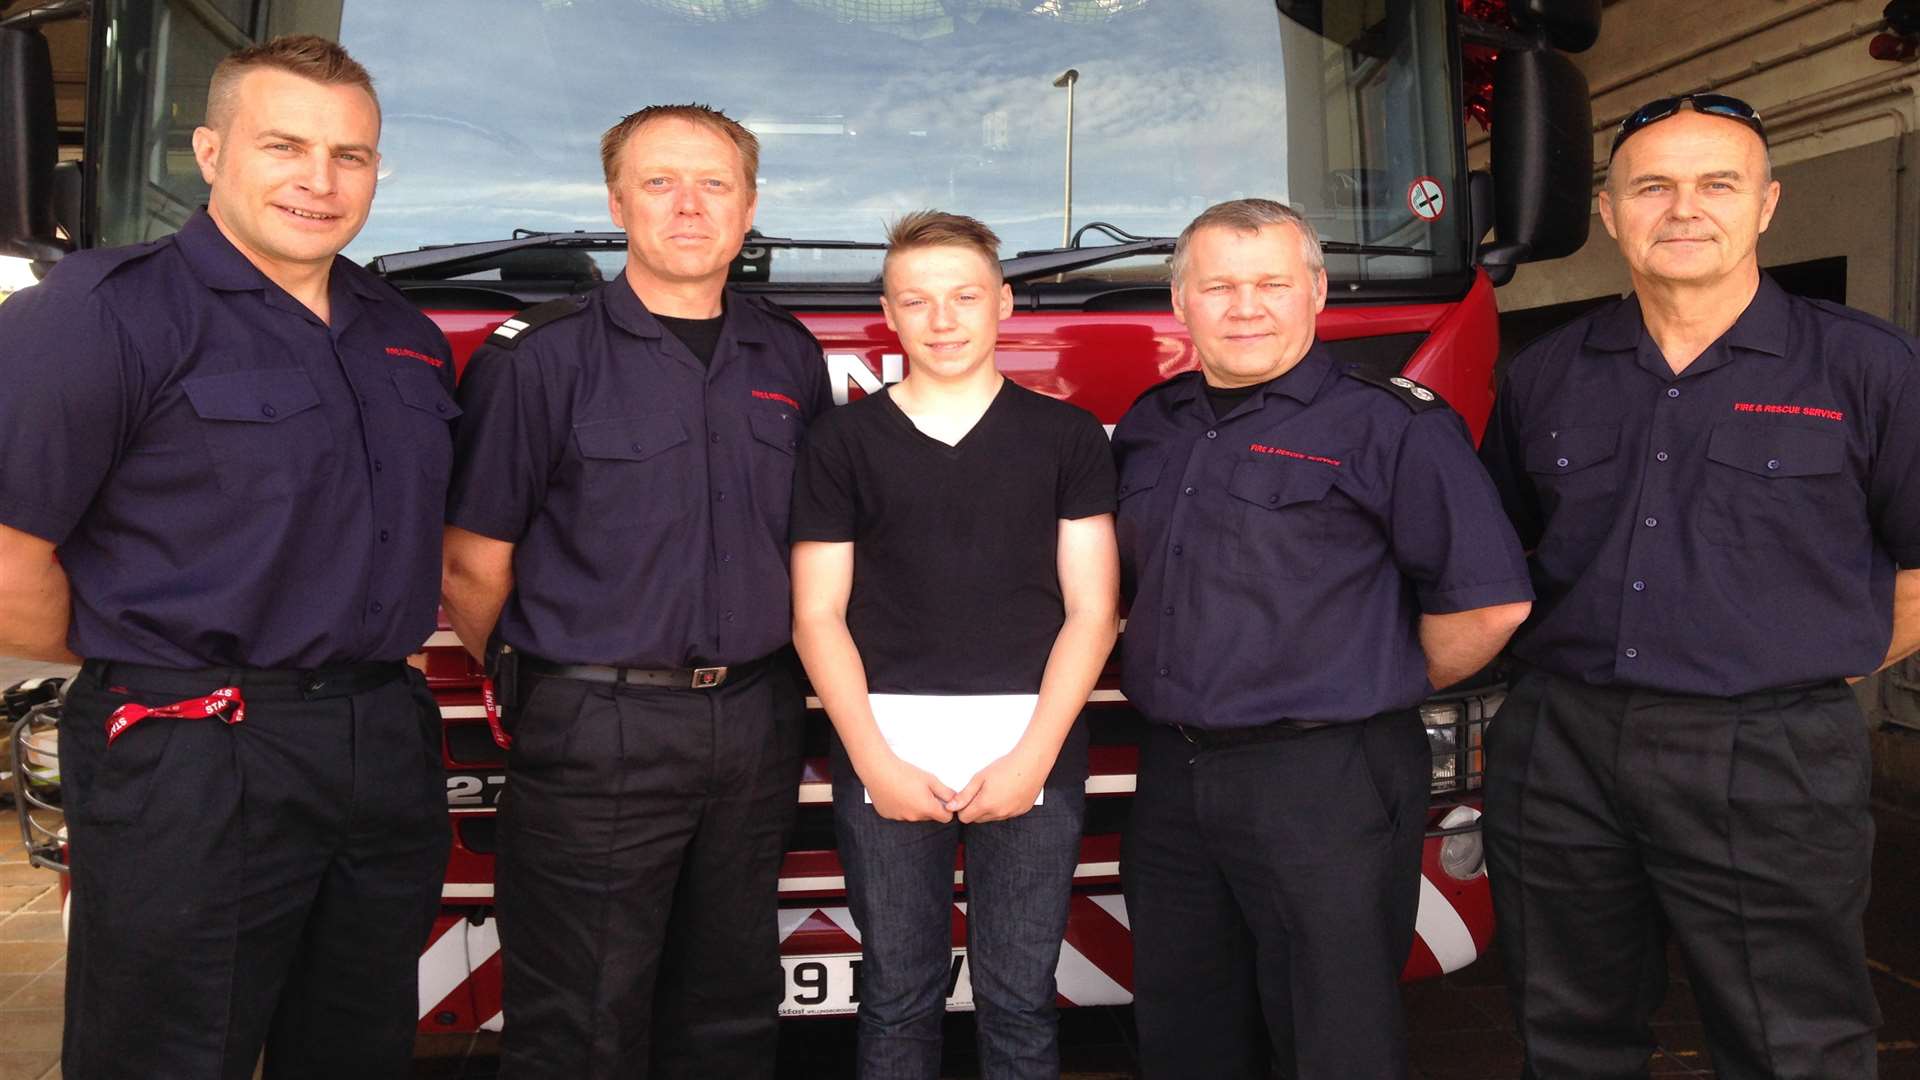 Ryan Smith, 16, with members of Red Watch at Medway Fire Station